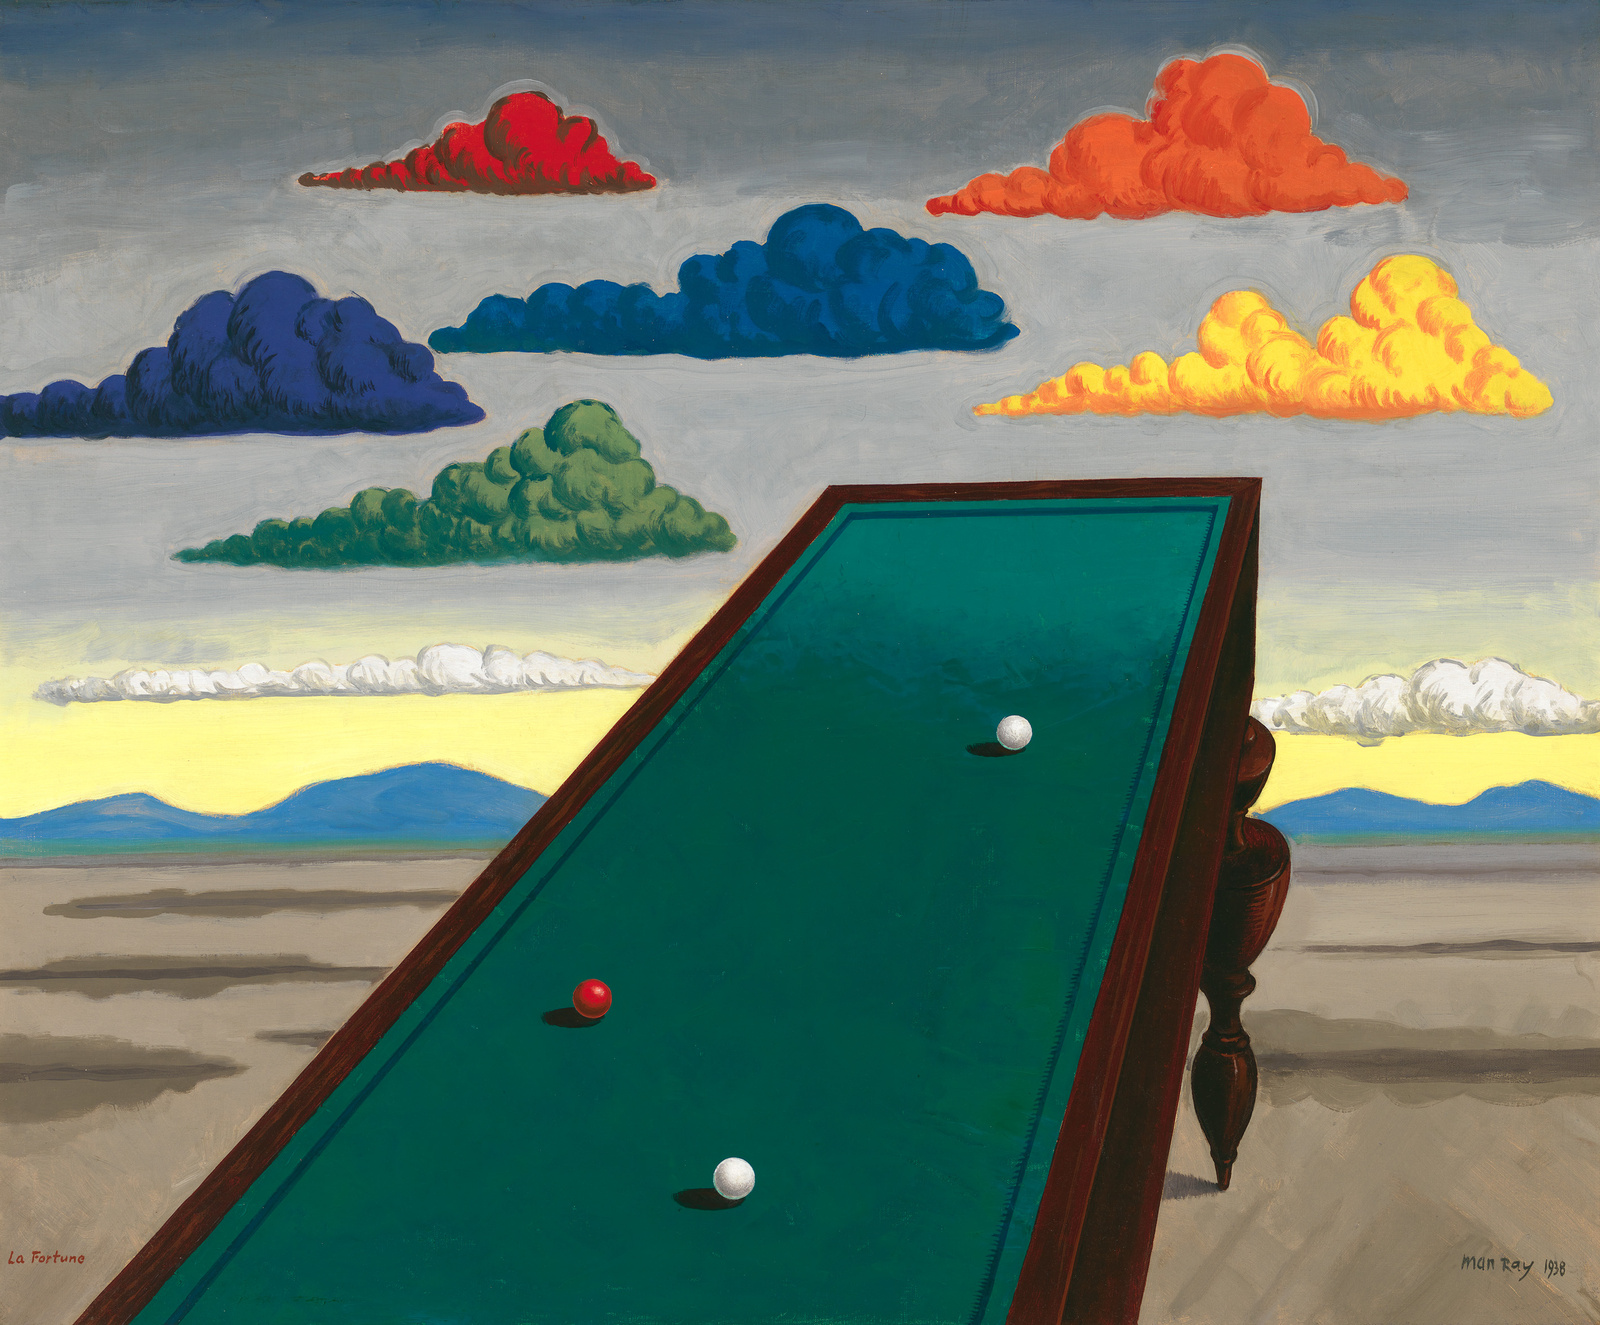 On a desert plain, a pool table with one red and two white pool balls extends toward a dull sky with yellow, blue, orange, and red clouds.